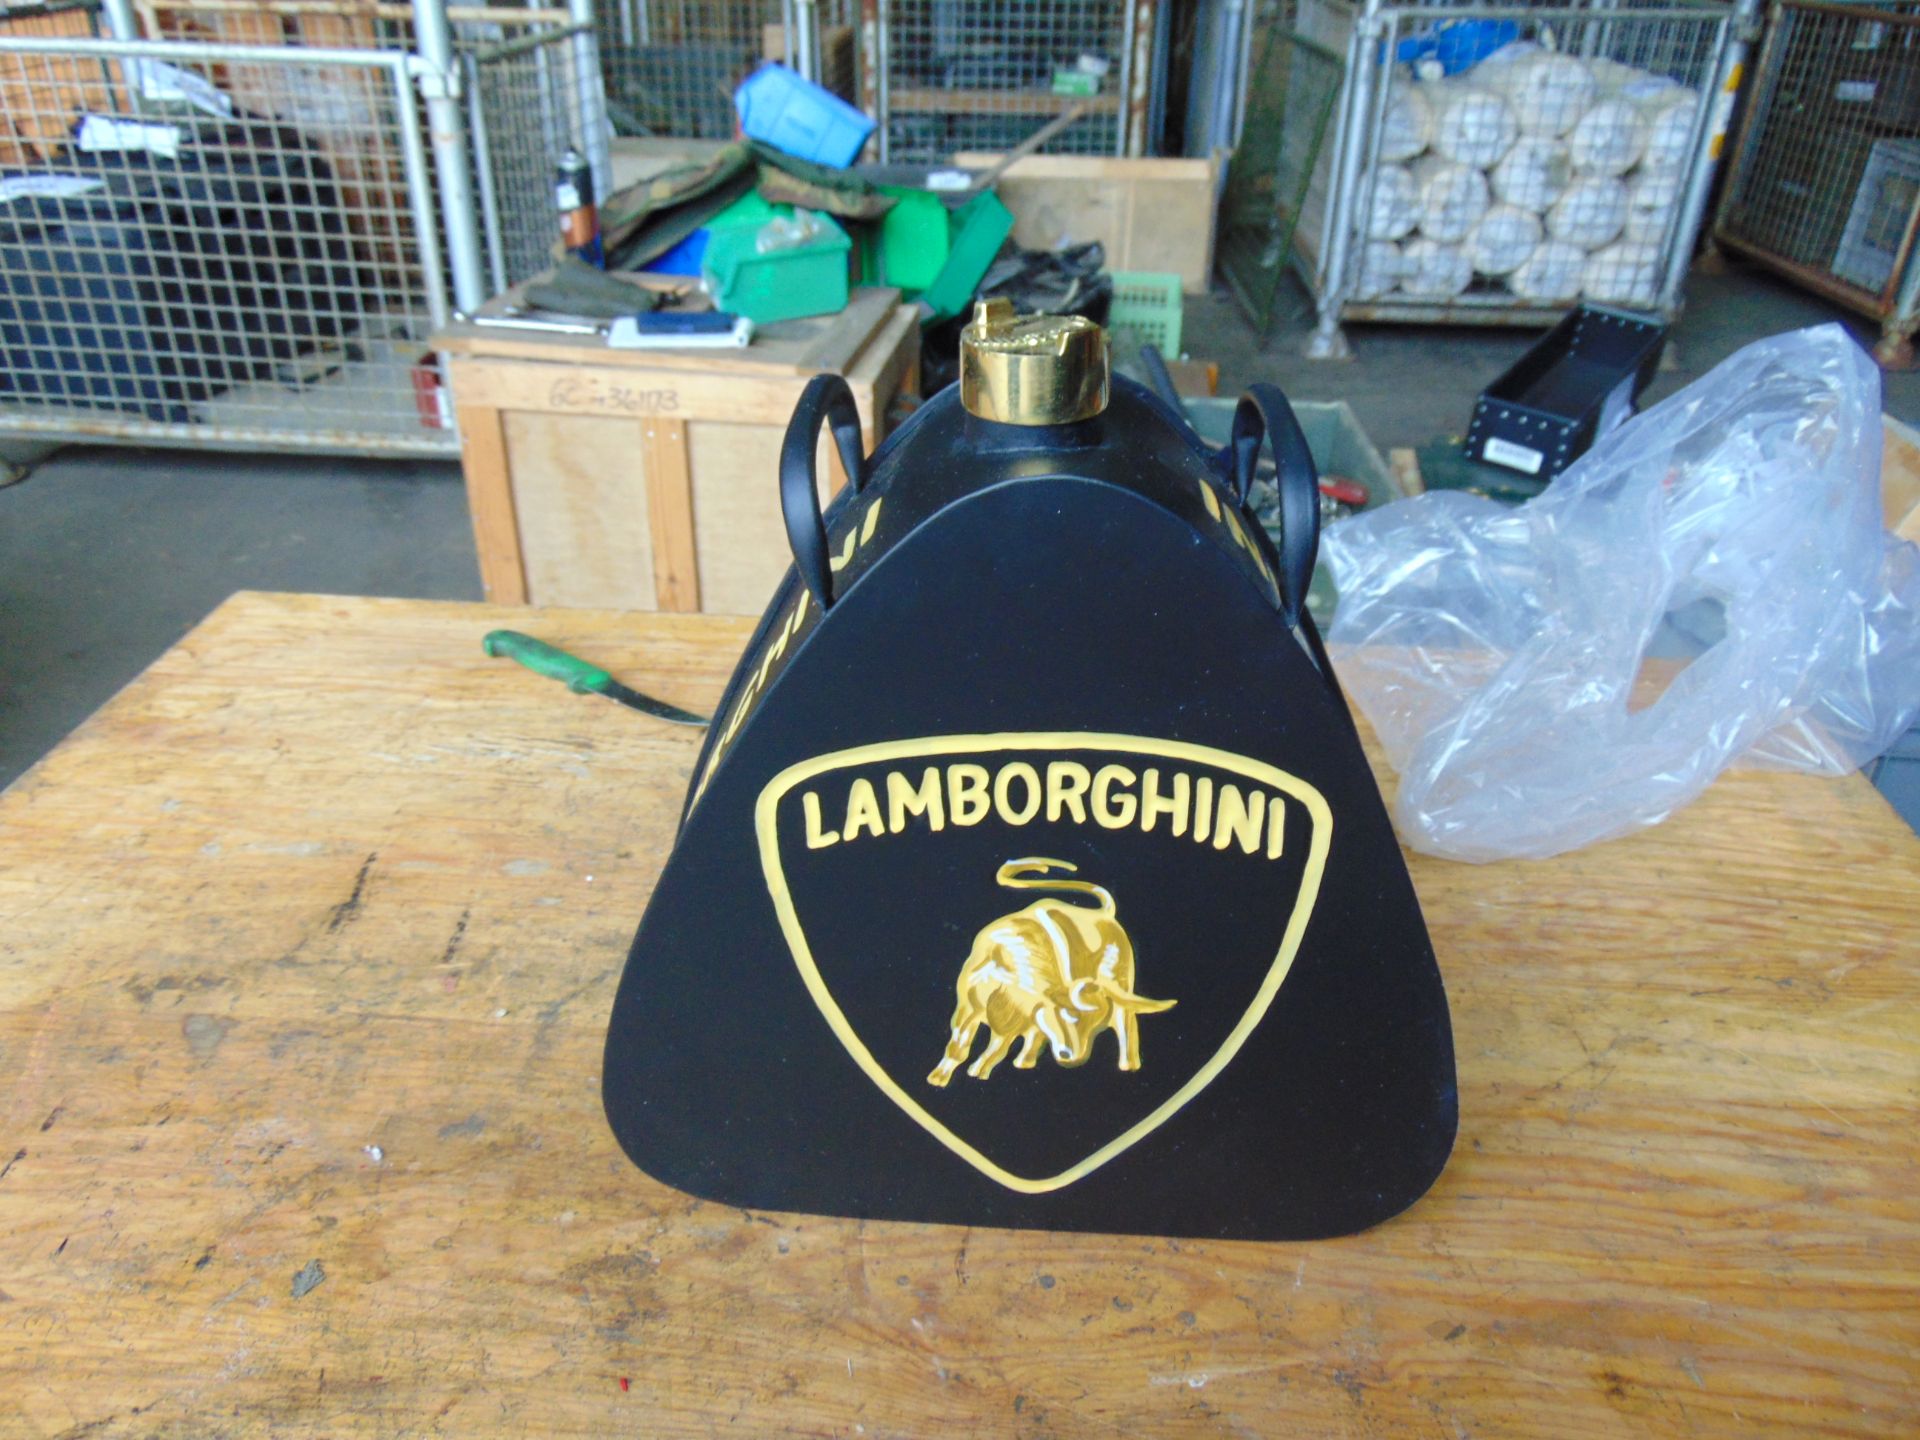 New Lamborghini Hand Painted Fuel/Oil Can with Brass Cap and Handles - Image 2 of 4